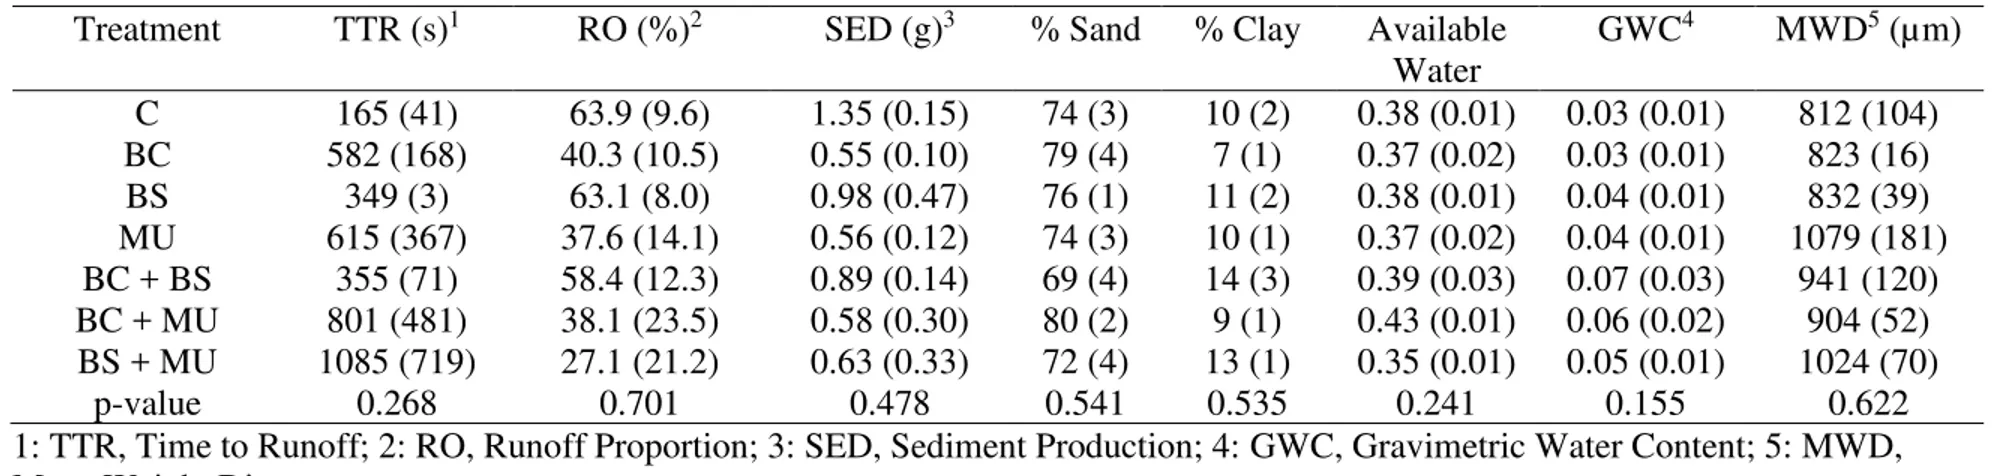 Table 2: Means of selected soil properties (0-10 cm) measured in June 2016 from soil amendment treatments applied across three soil  restoration sites located within the Roosevelt National Forest, Colorado